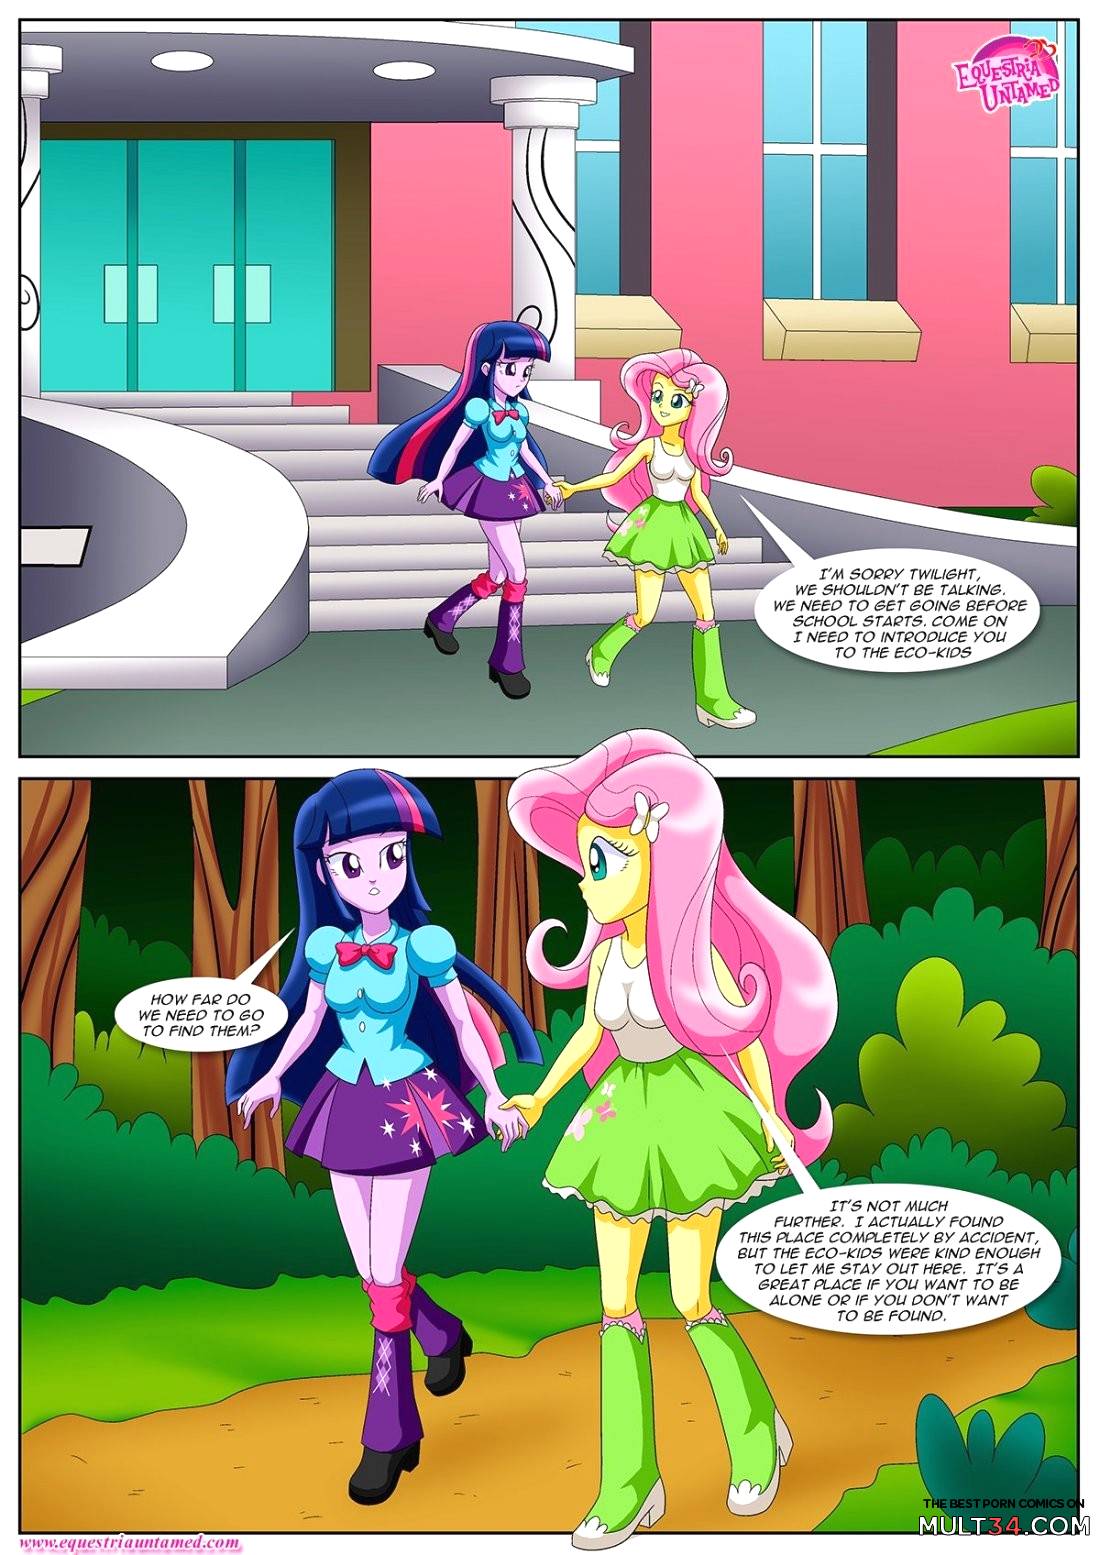 Equestria girls unleashed 2 page 4